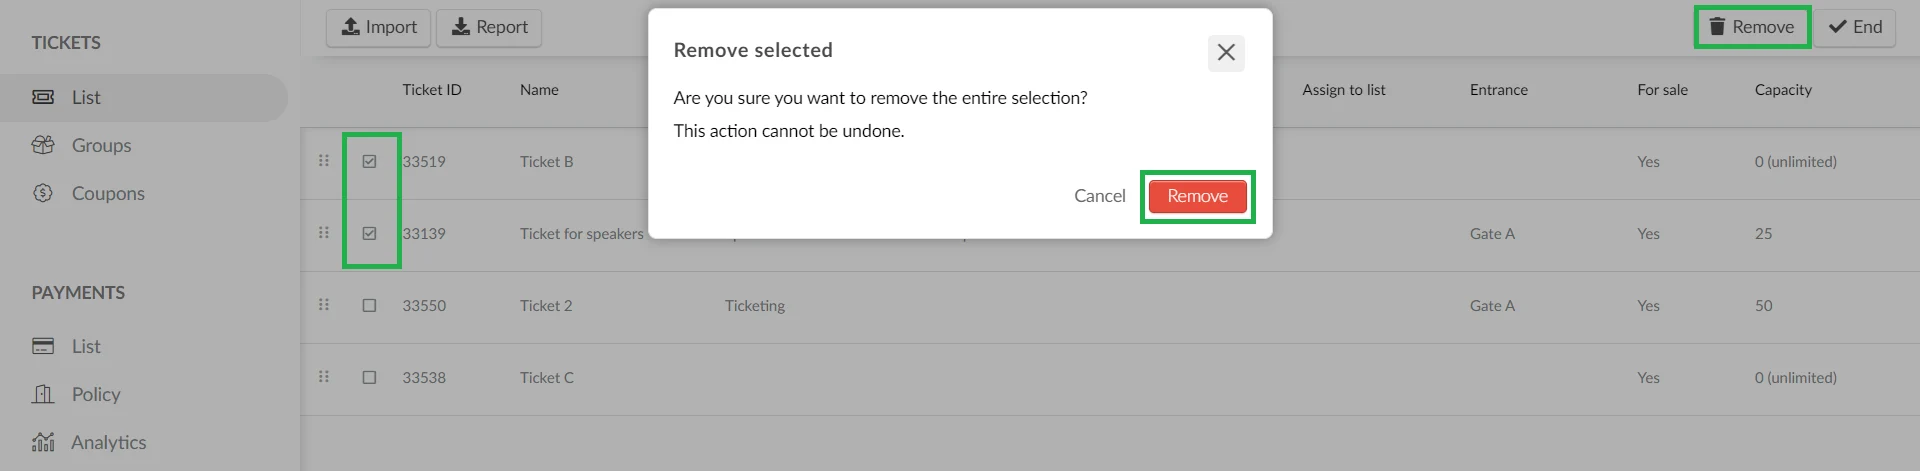 Marketing > tickets > select a ticket > Edit > remove > end